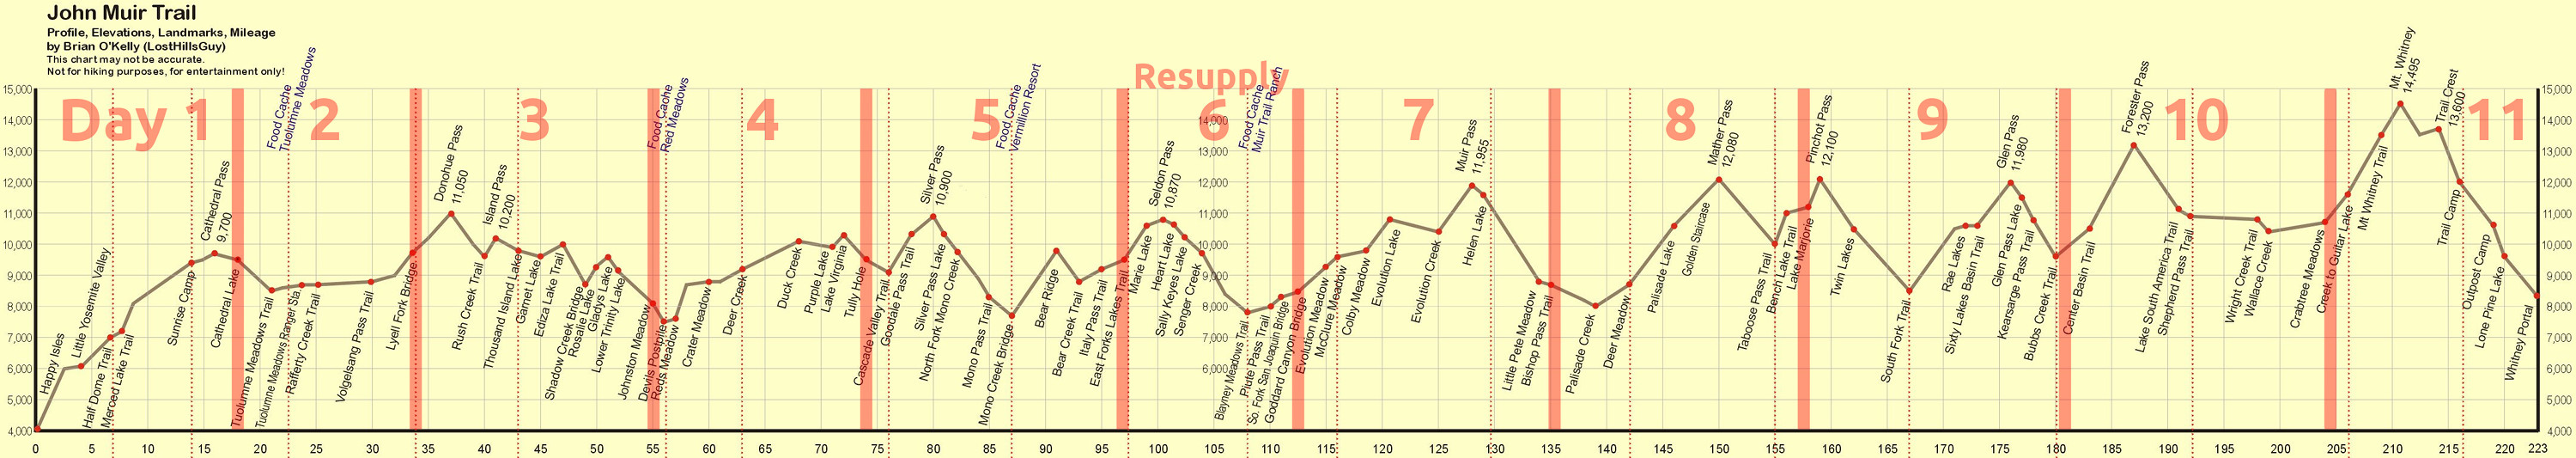 JMT Elevation Panorama with 11-day schedule